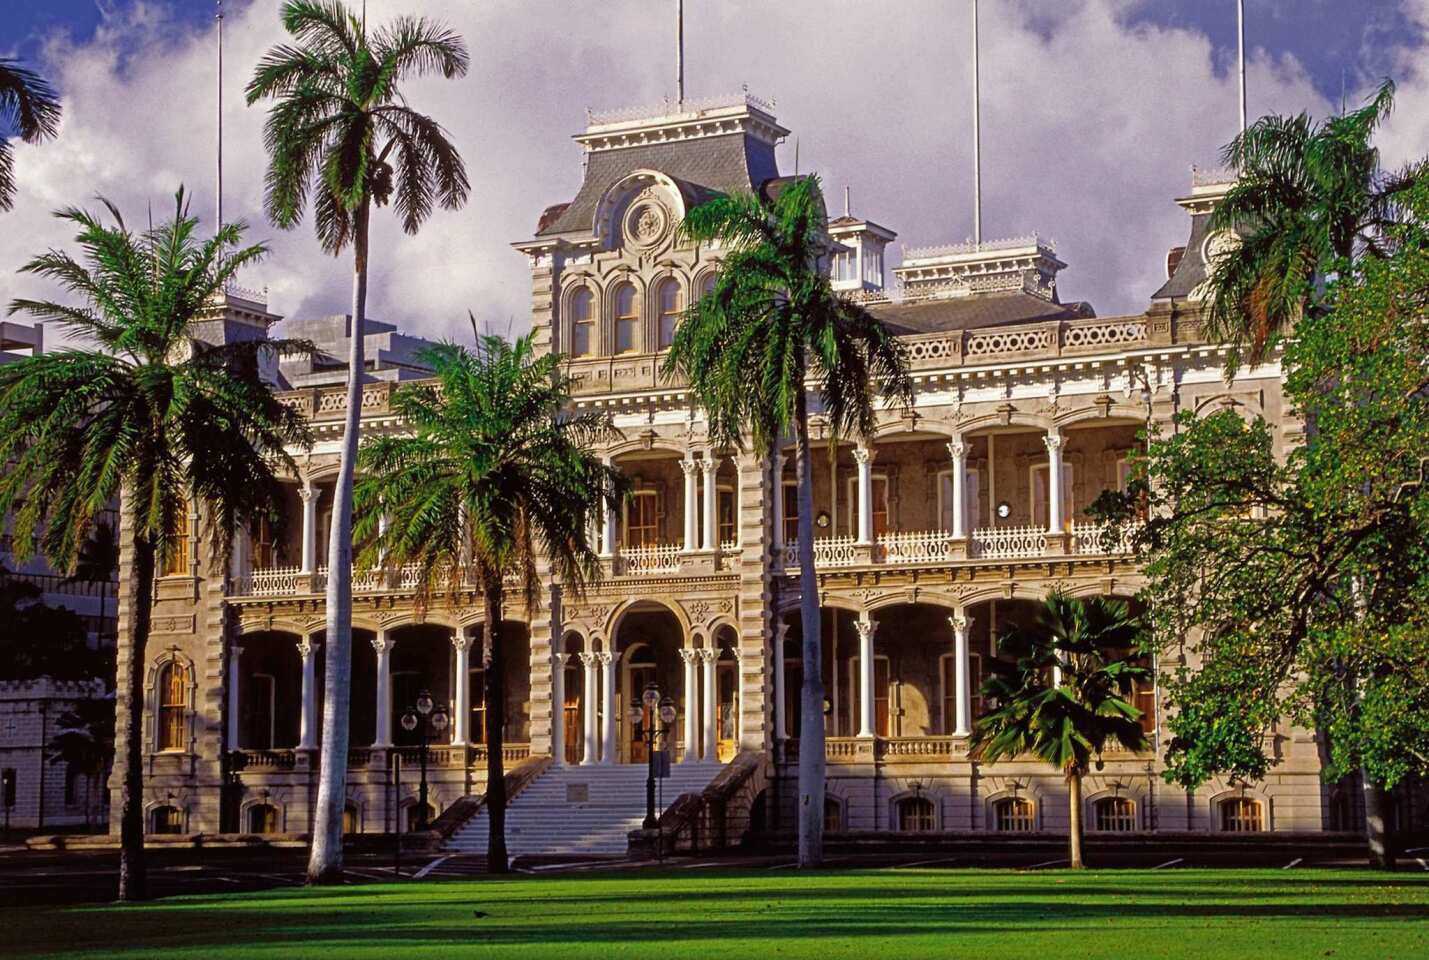 This European-influenced palace, completed in 1882, is where King David Kalakaua and his wife, Queen Kapiolani, and, later, Queen Liliuokalani, reigned.